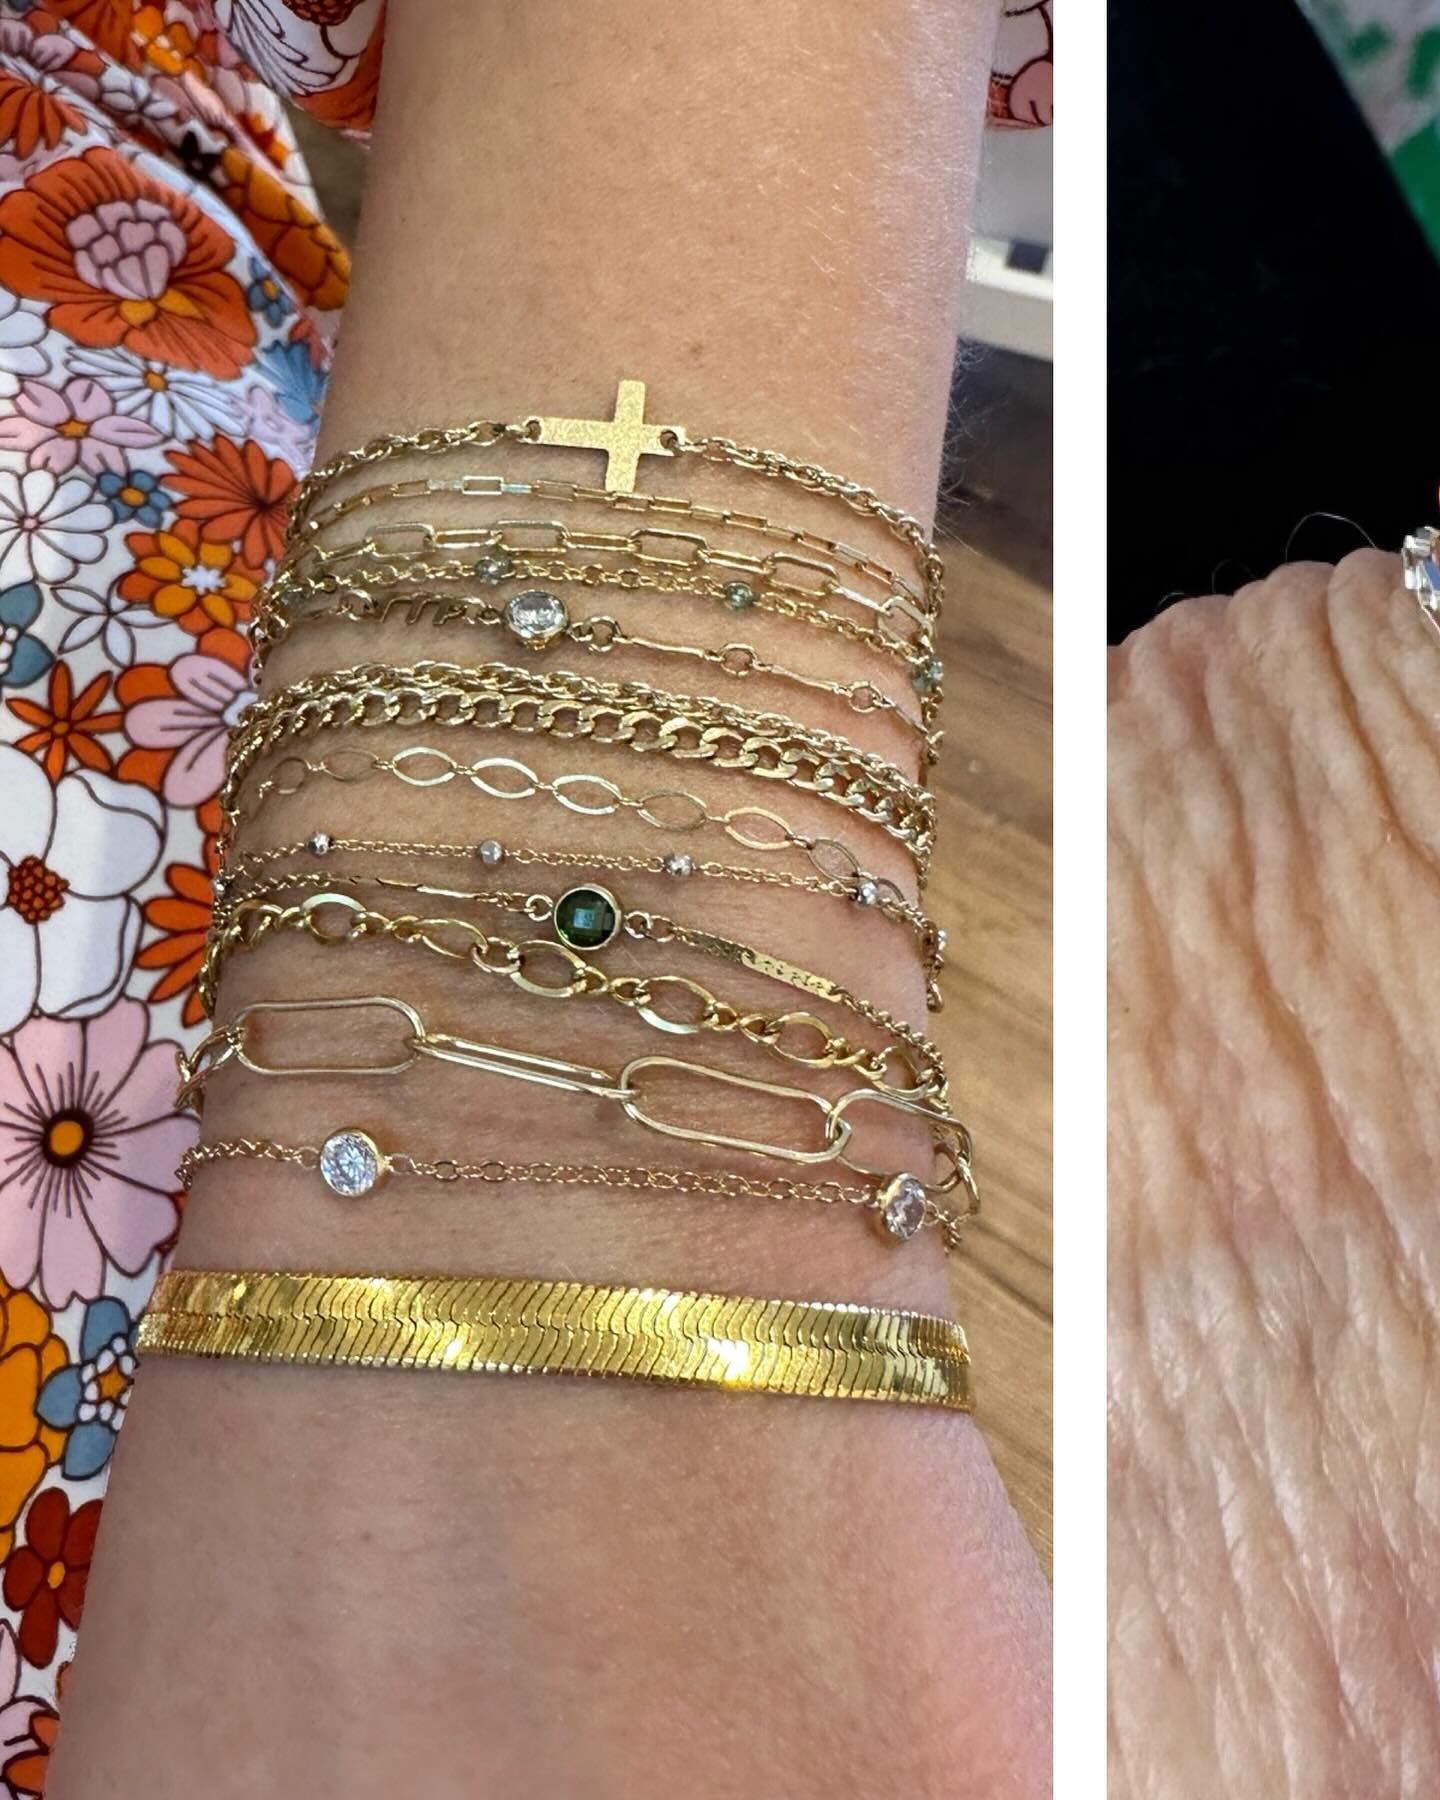 Sunday Stackspiration ⛓️✨⚡️. At Sparked we love helping create unique stacks. If you ever feel overwhelmed or need help feel free to ask.  #permanentjewelry #permanentjewelrygreenvillesc #peramentbracelet #stacksonstacks #goldfilled